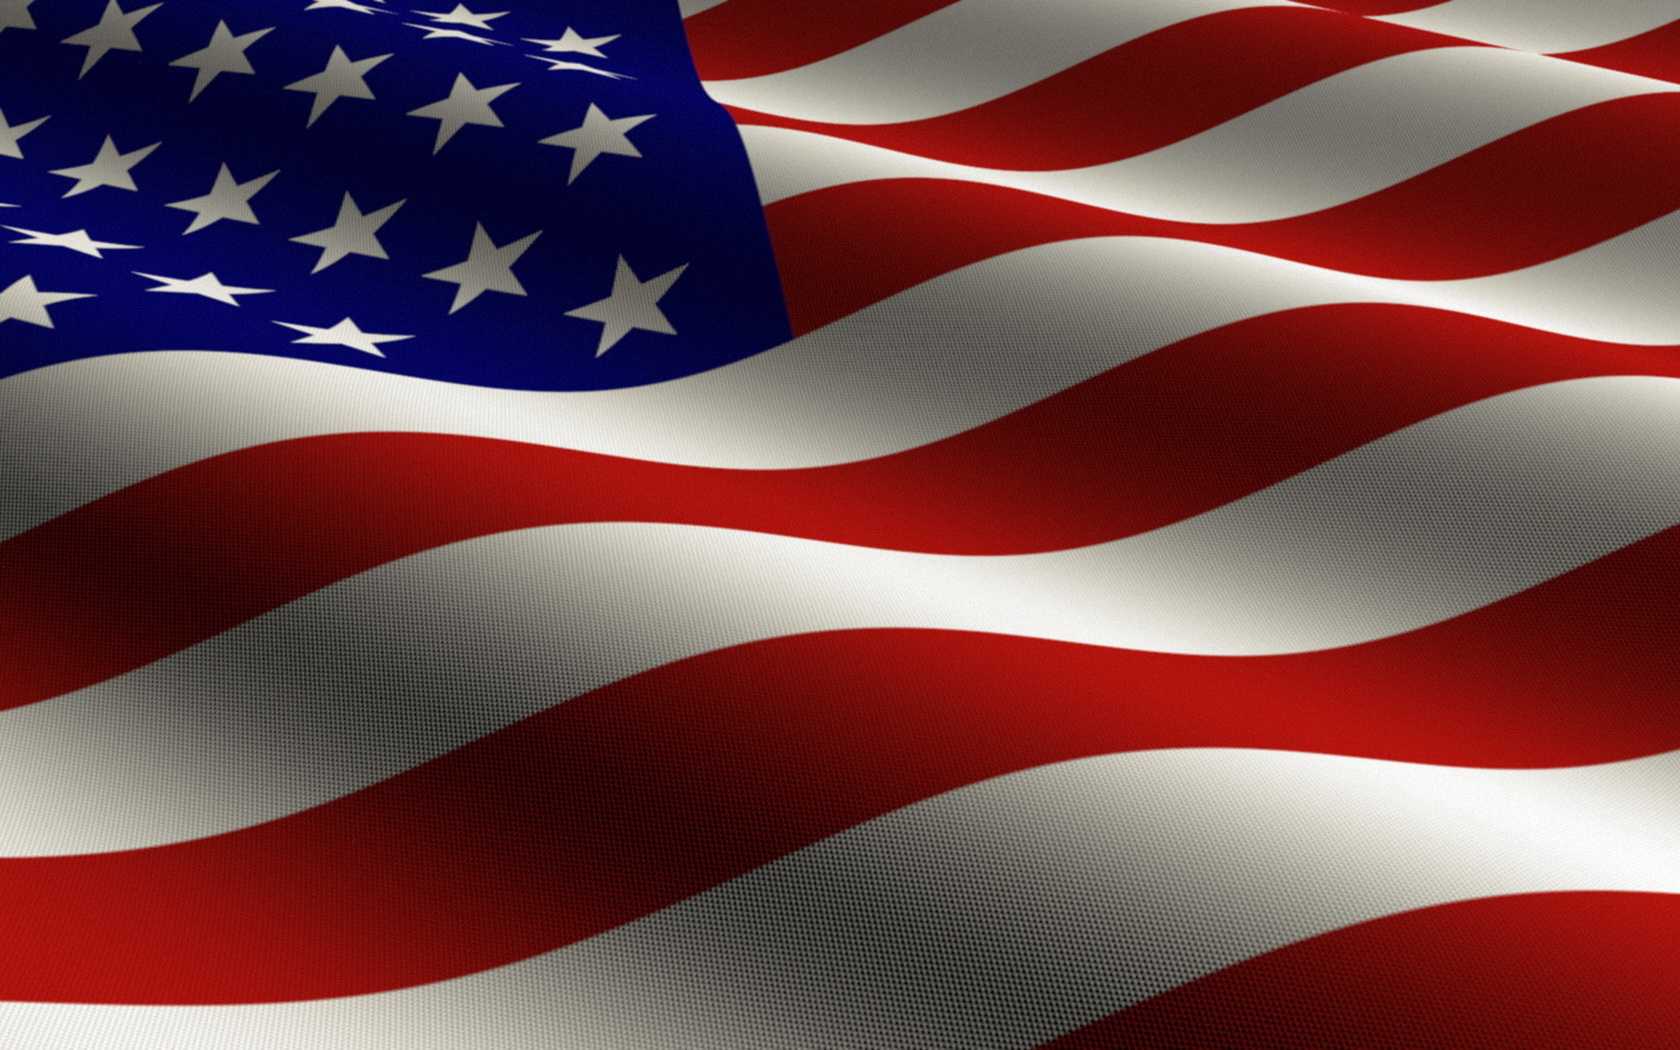 American Flag Backgrounds For Powerpoint Templates – Ppt For American Flag Powerpoint Template